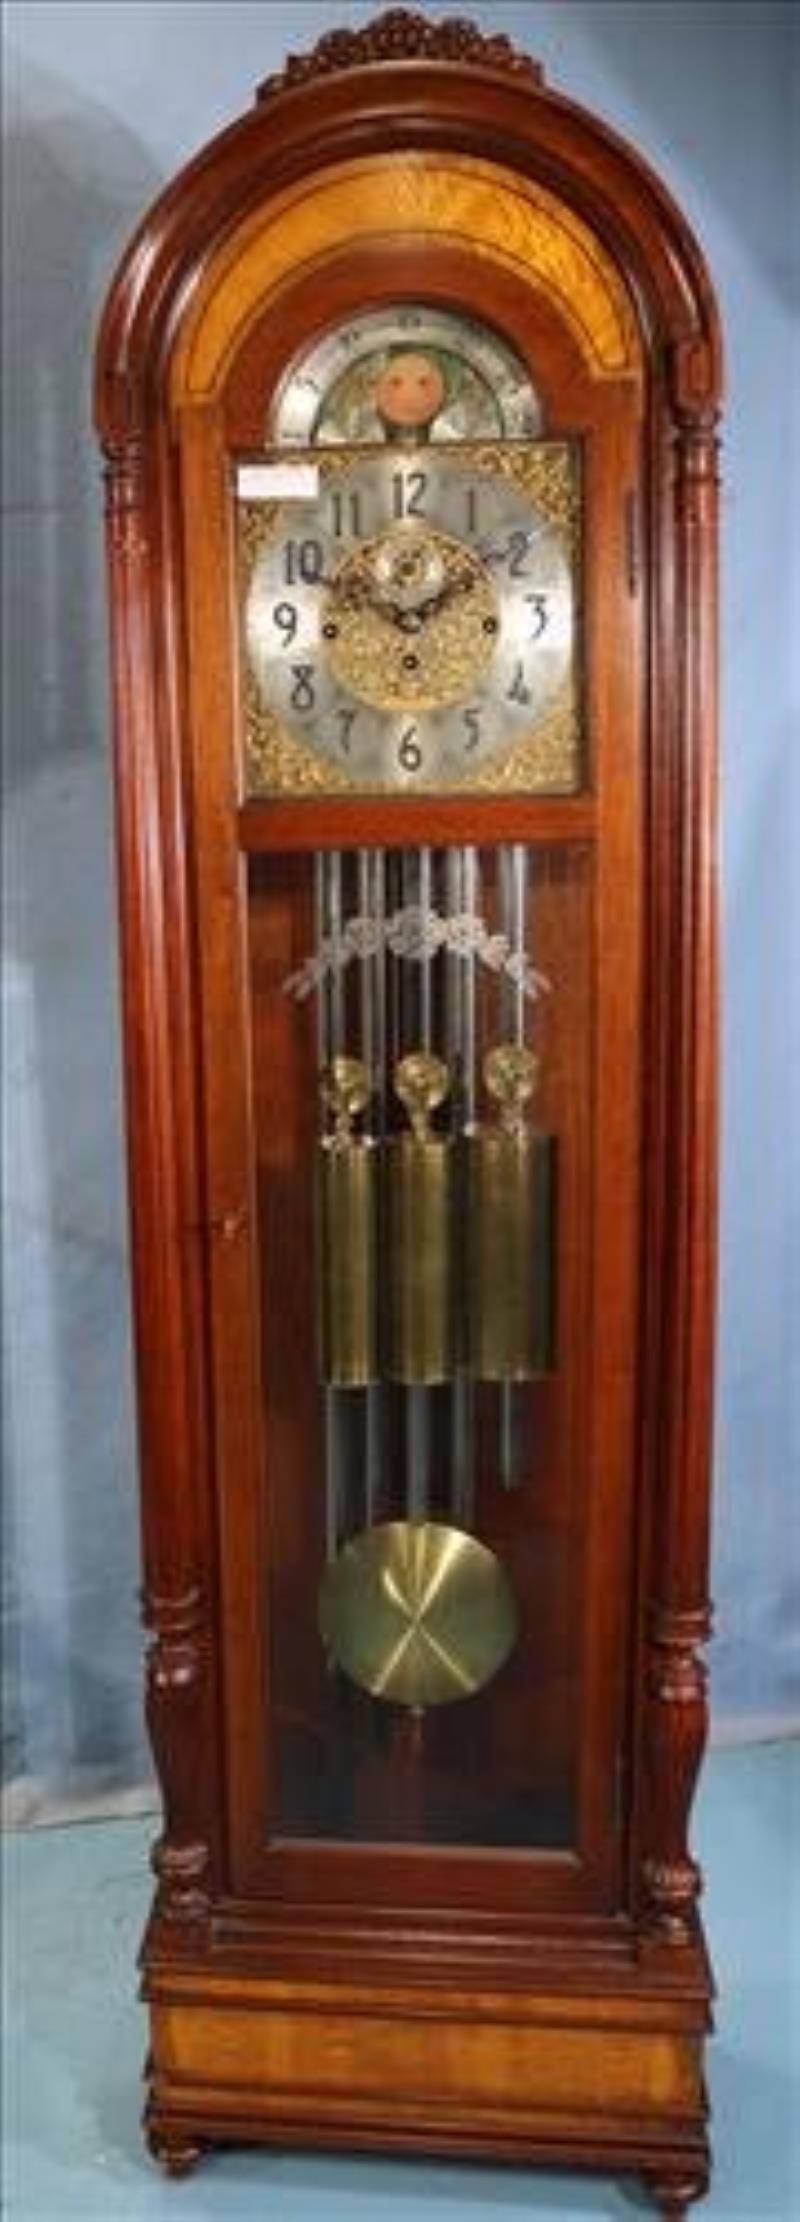 5 tube grandfather clock, Herschede Model 276